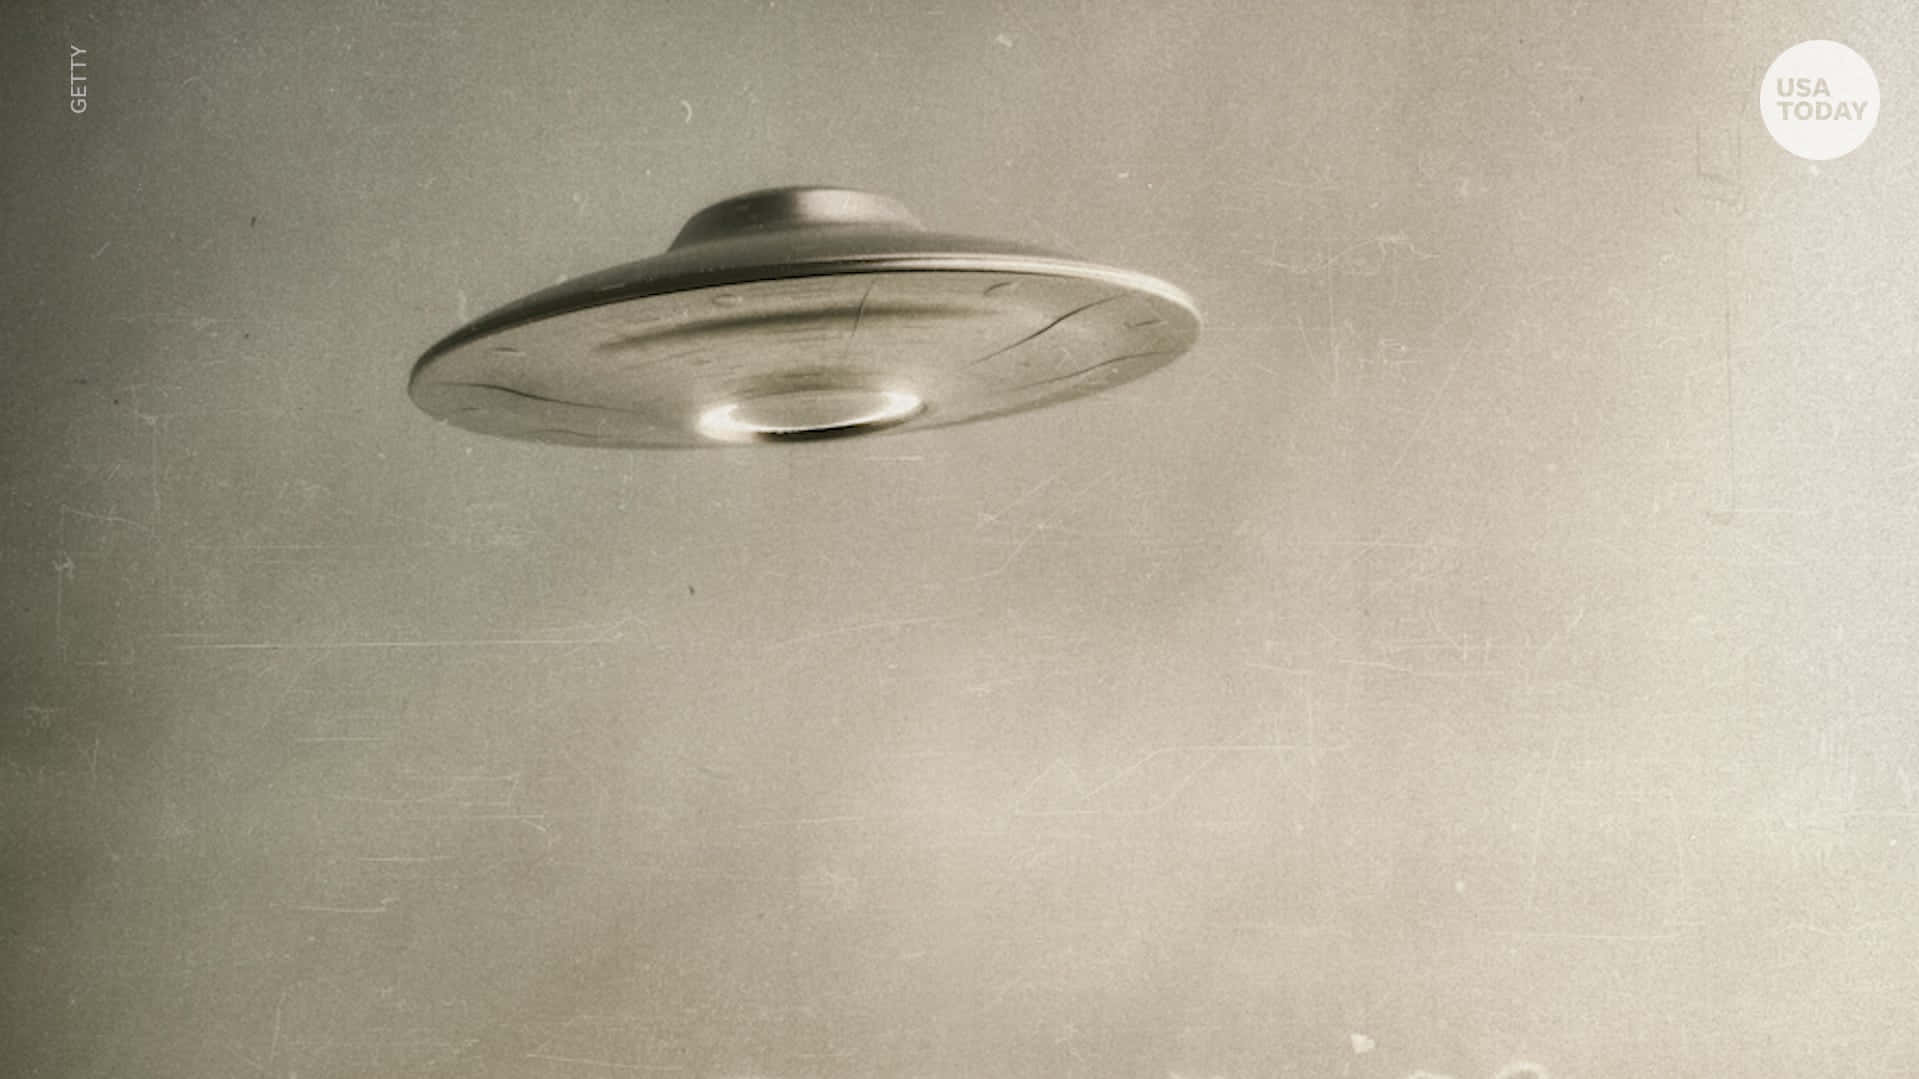 "Mysterious and awe-inspiring UFO sighting in the night sky."